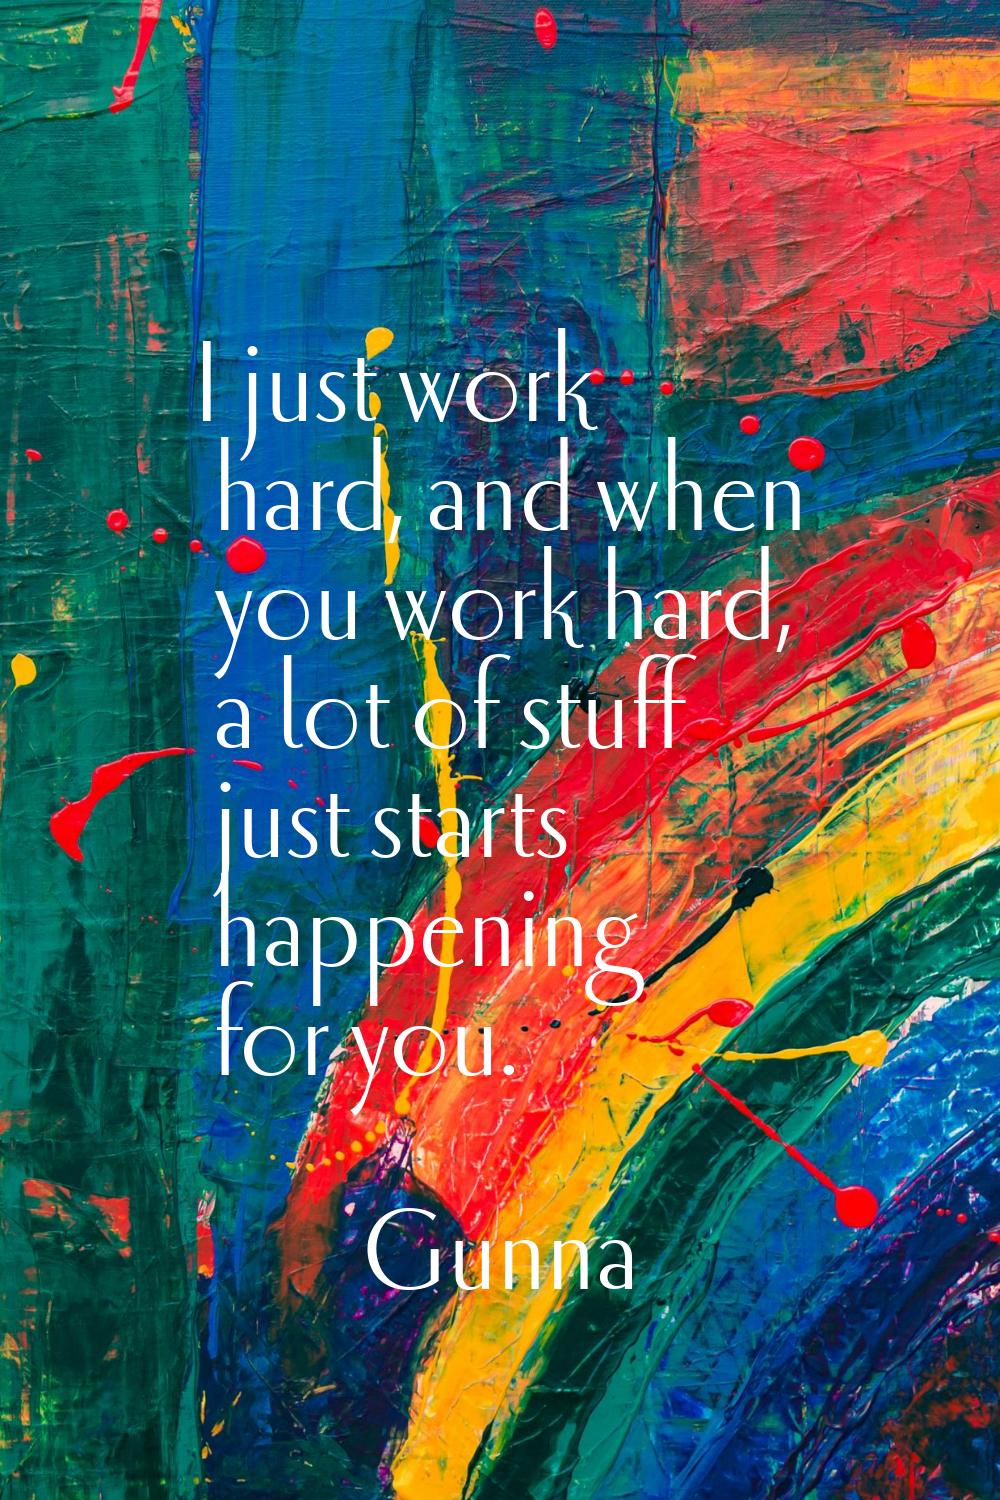 I just work hard, and when you work hard, a lot of stuff just starts happening for you.